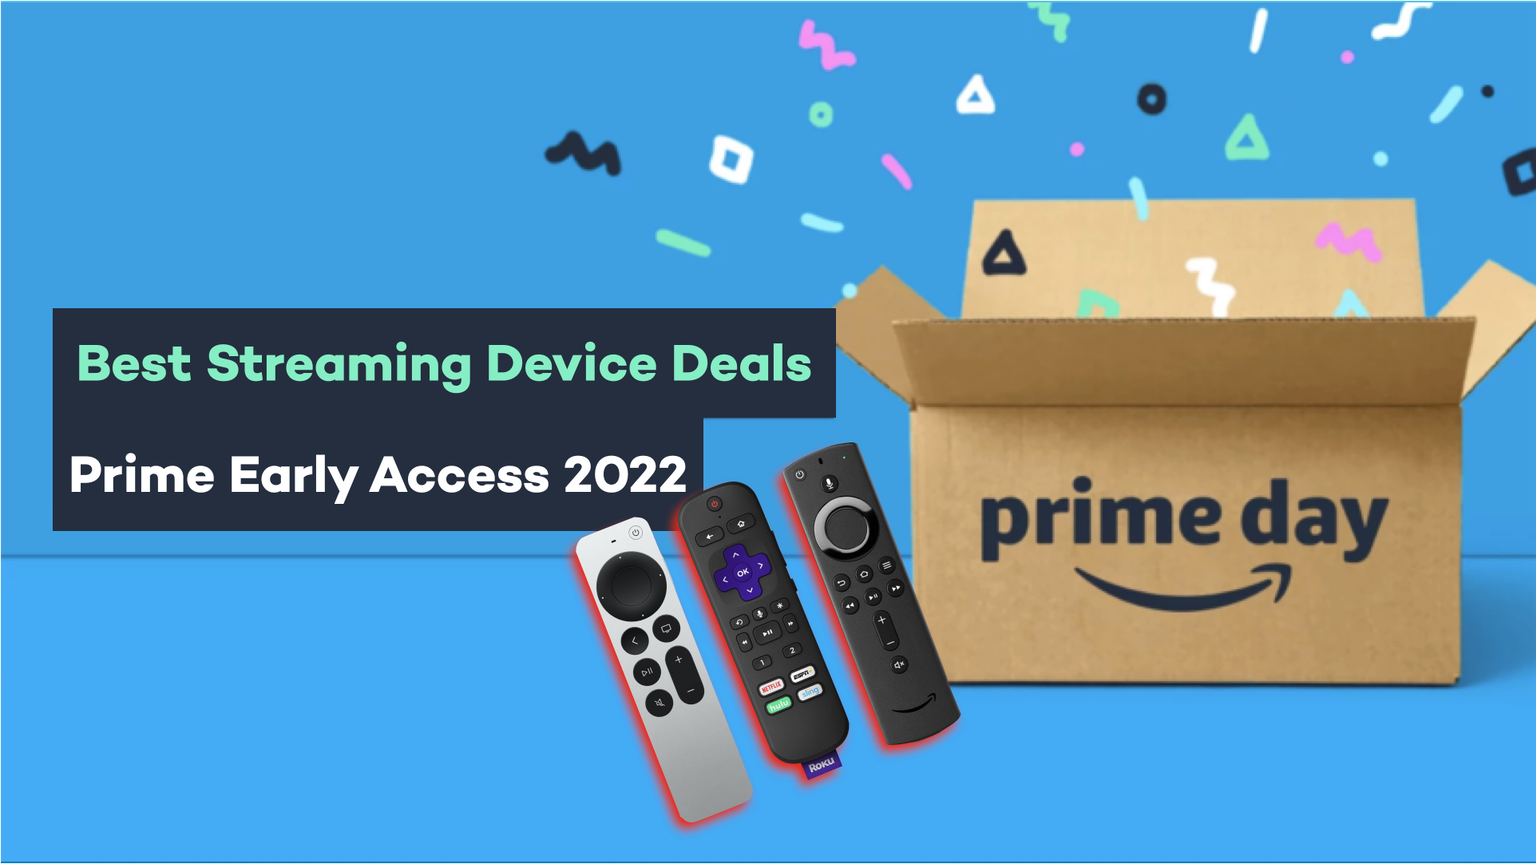 Best Streaming Device Deals for Amazon Early Access Sale 2022: Up to 50% Off Fire TV, Roku, Apple TV for Fall Prime Day